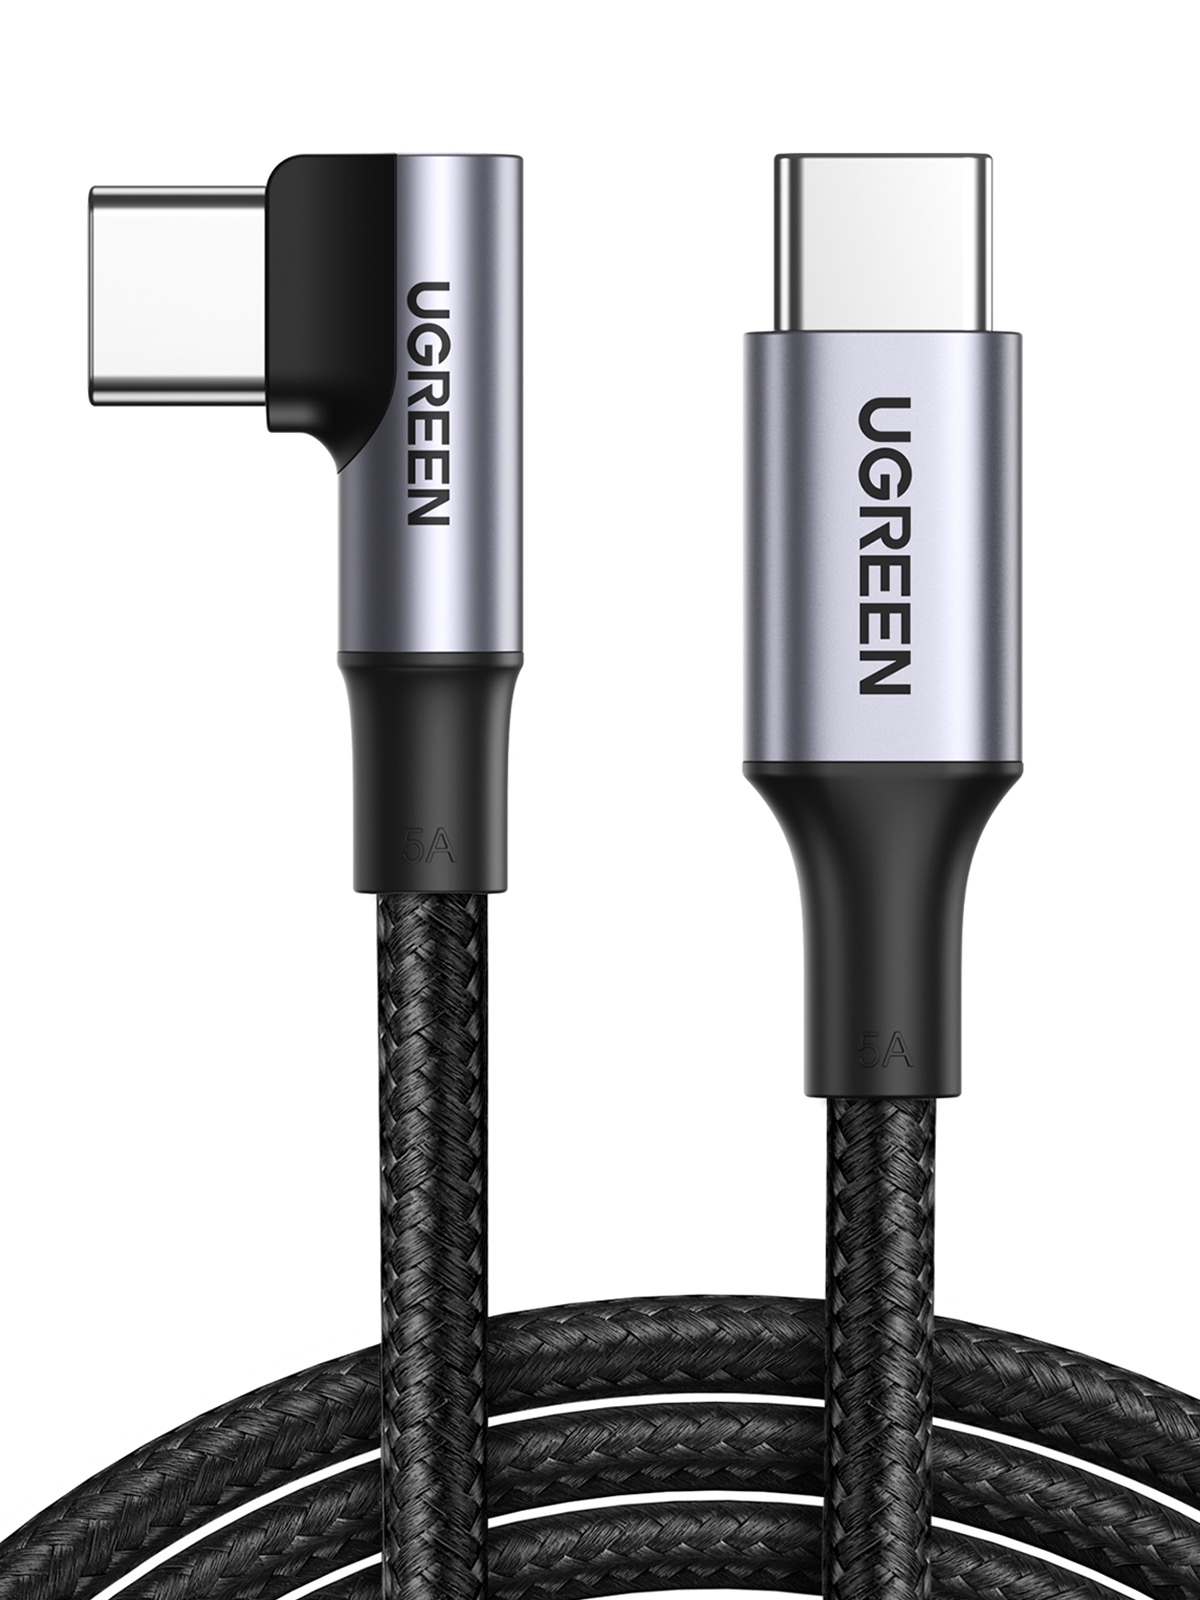 UGREEN USB-C 2.0 to Angled USB-C M/M Cable Aluminium Shell with Braided 2m (Black)